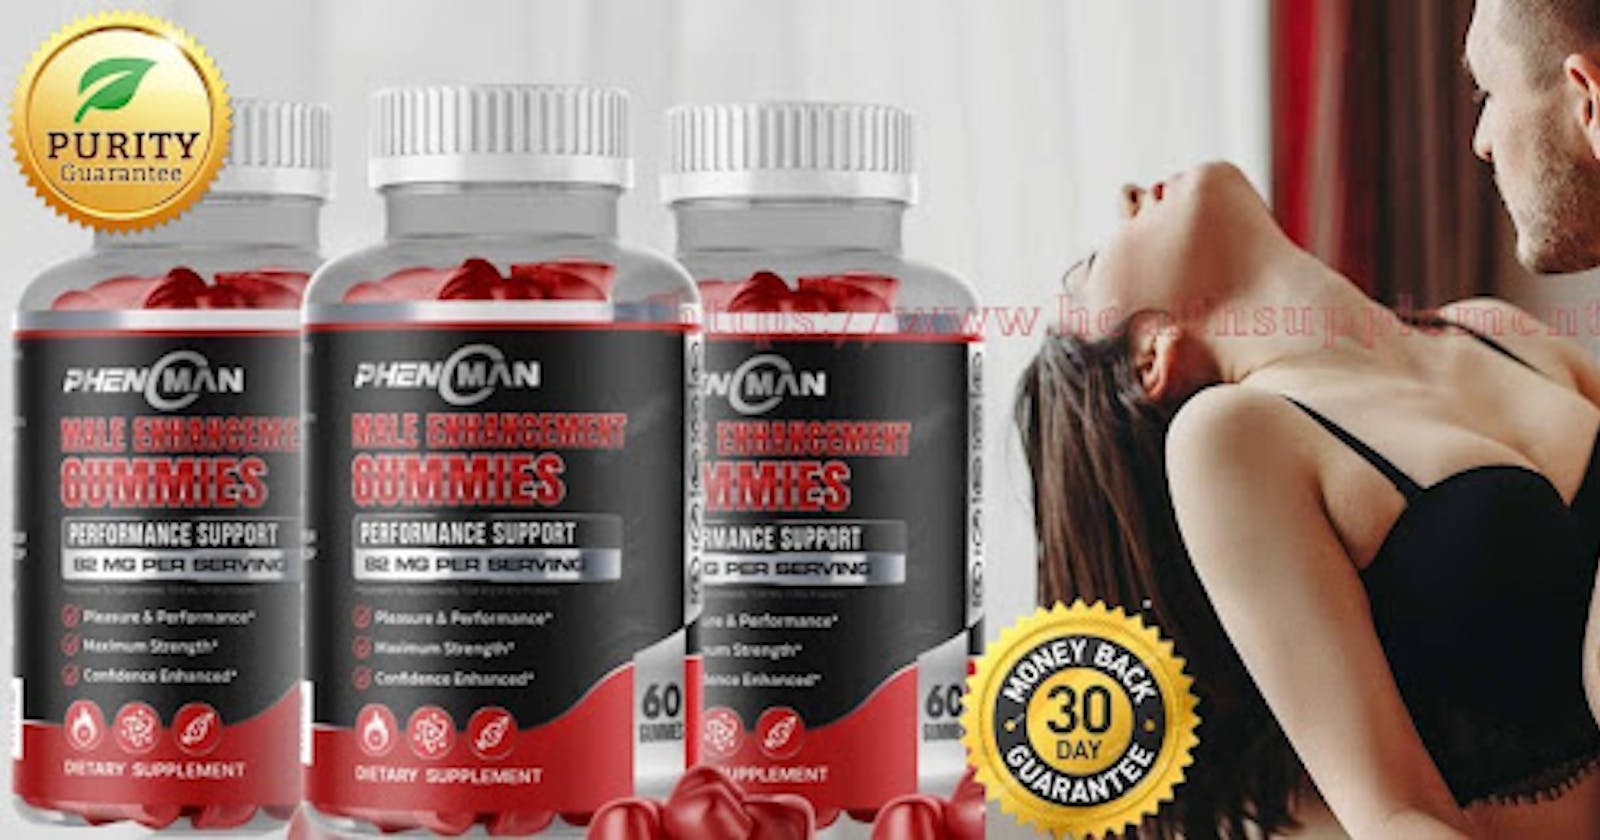 Phenoman Male Enhancement Gummies – Every man desires dependable and long-lasting performance.